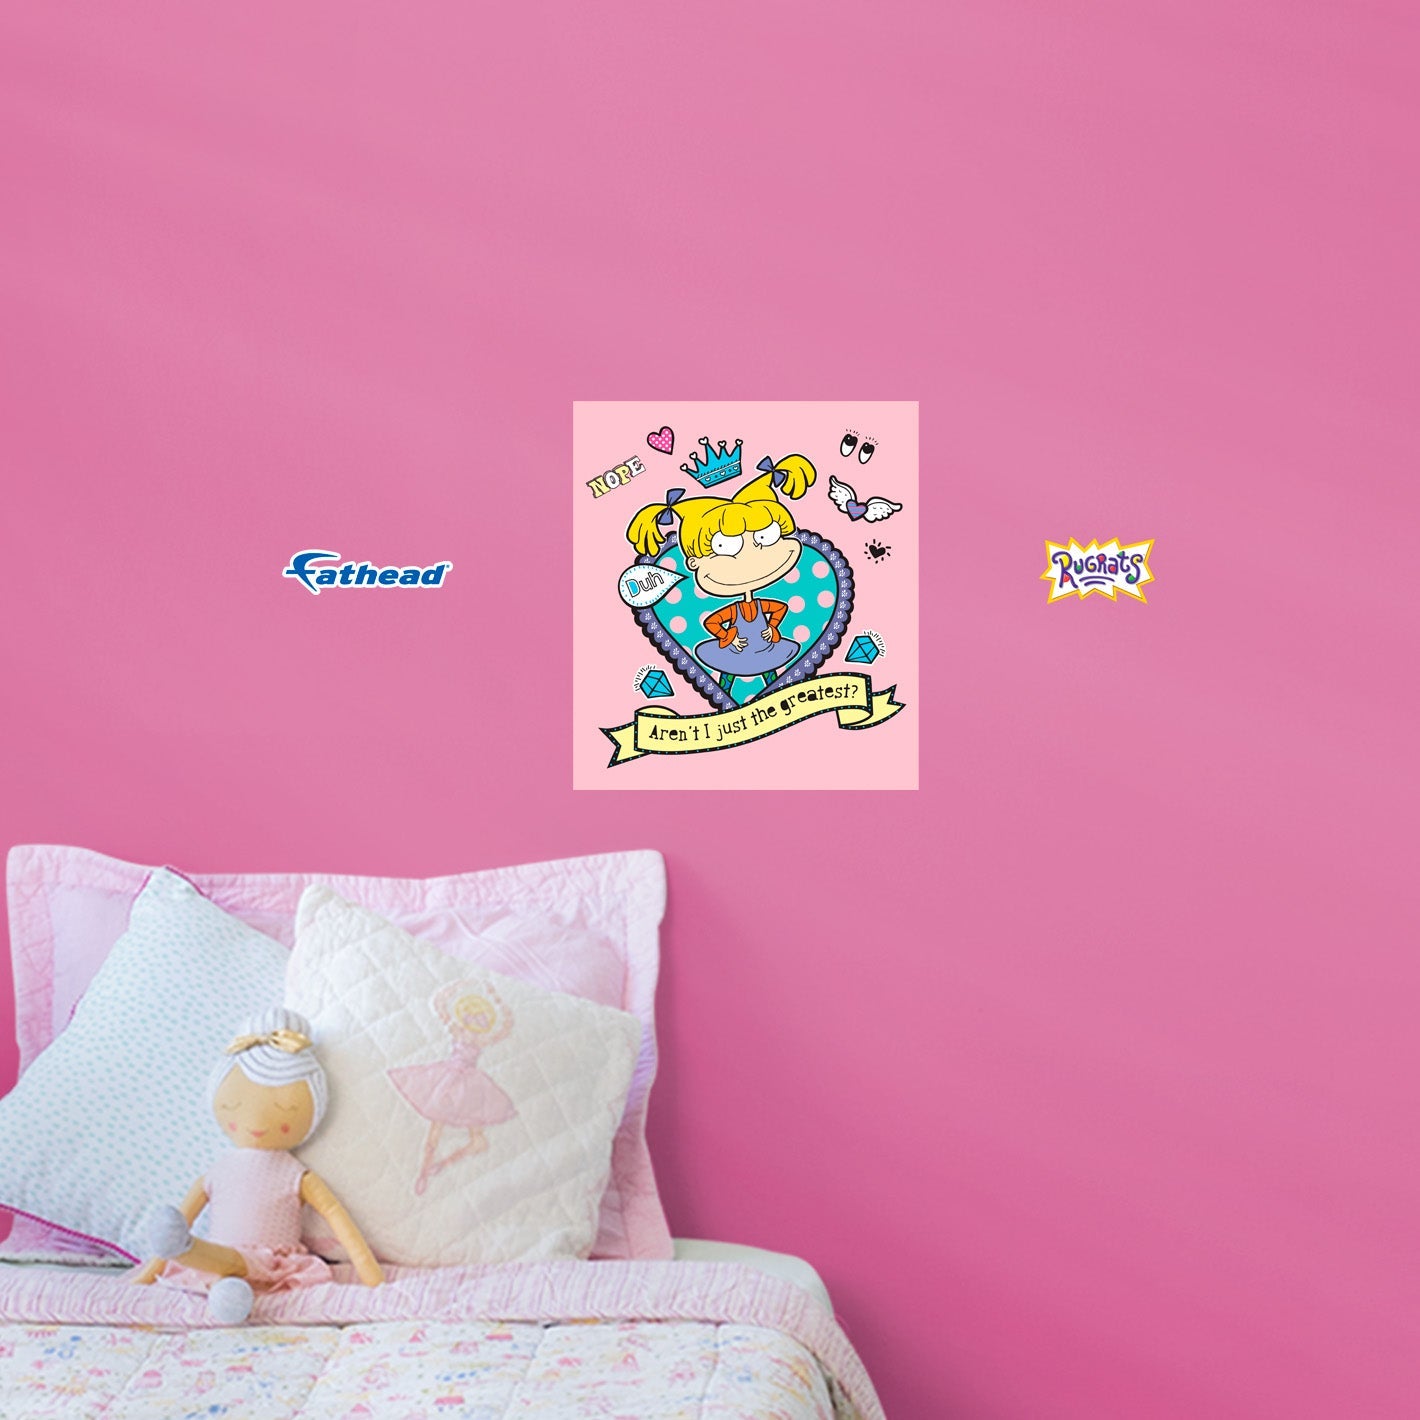 Rugrats: Aren't I Just The Greatest Poster - Officially Licensed Nickelodeon Removable Adhesive Decal